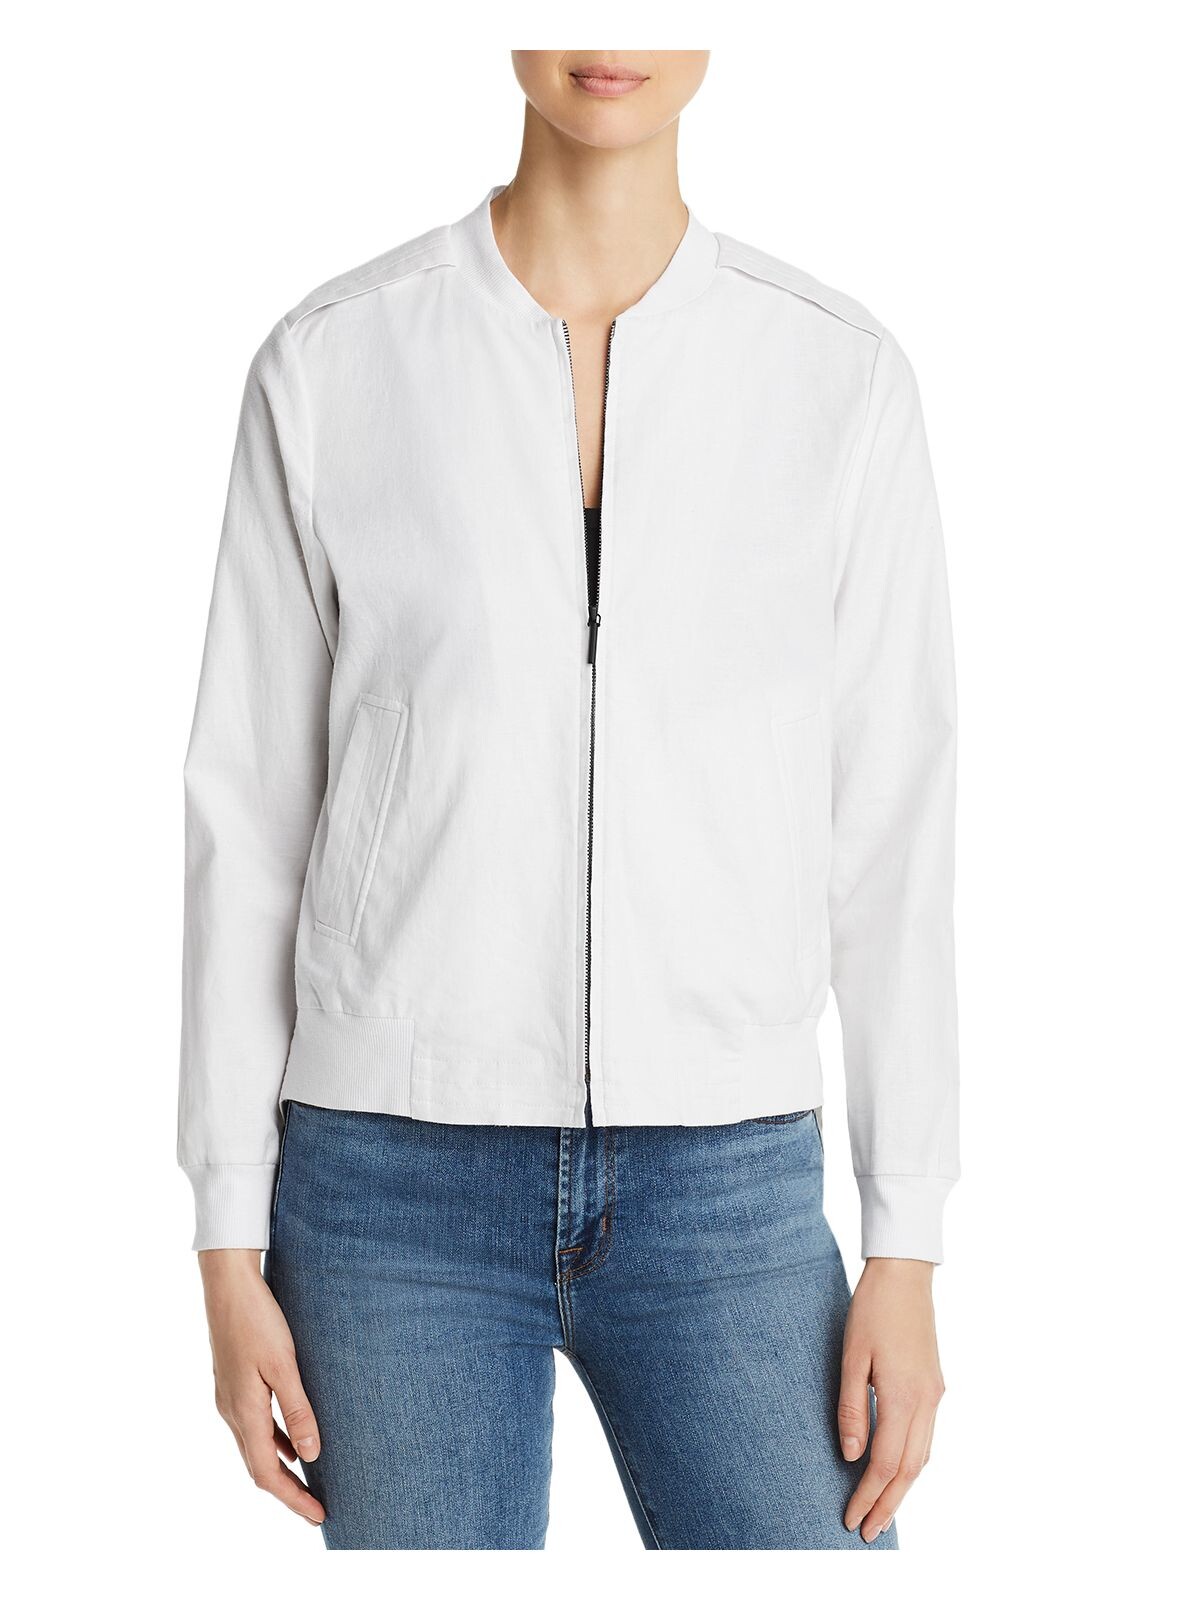 KENNETH COLE Womens White Zippered Pocketed Hi-lo Hem Ribbed Trimmed Bomber Jacket M